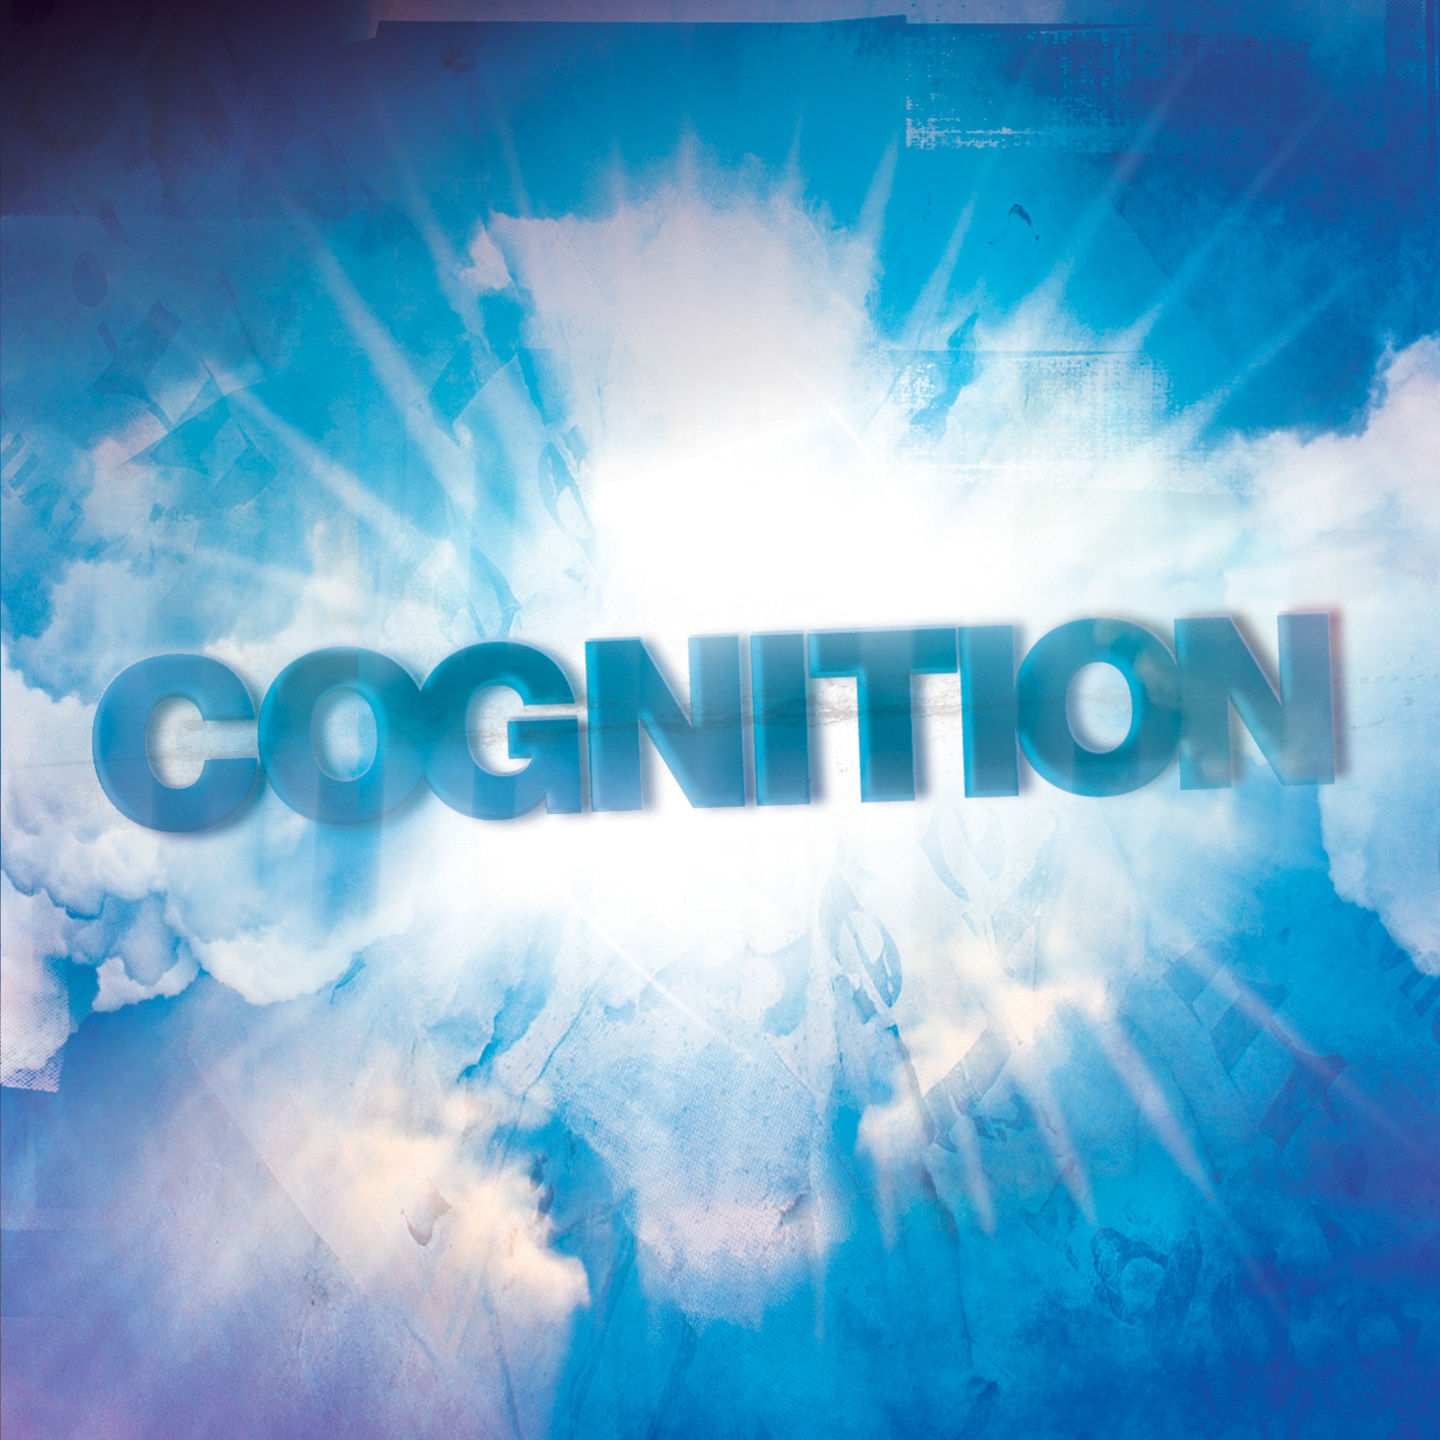 Moment of Truth (Cognition RMX)